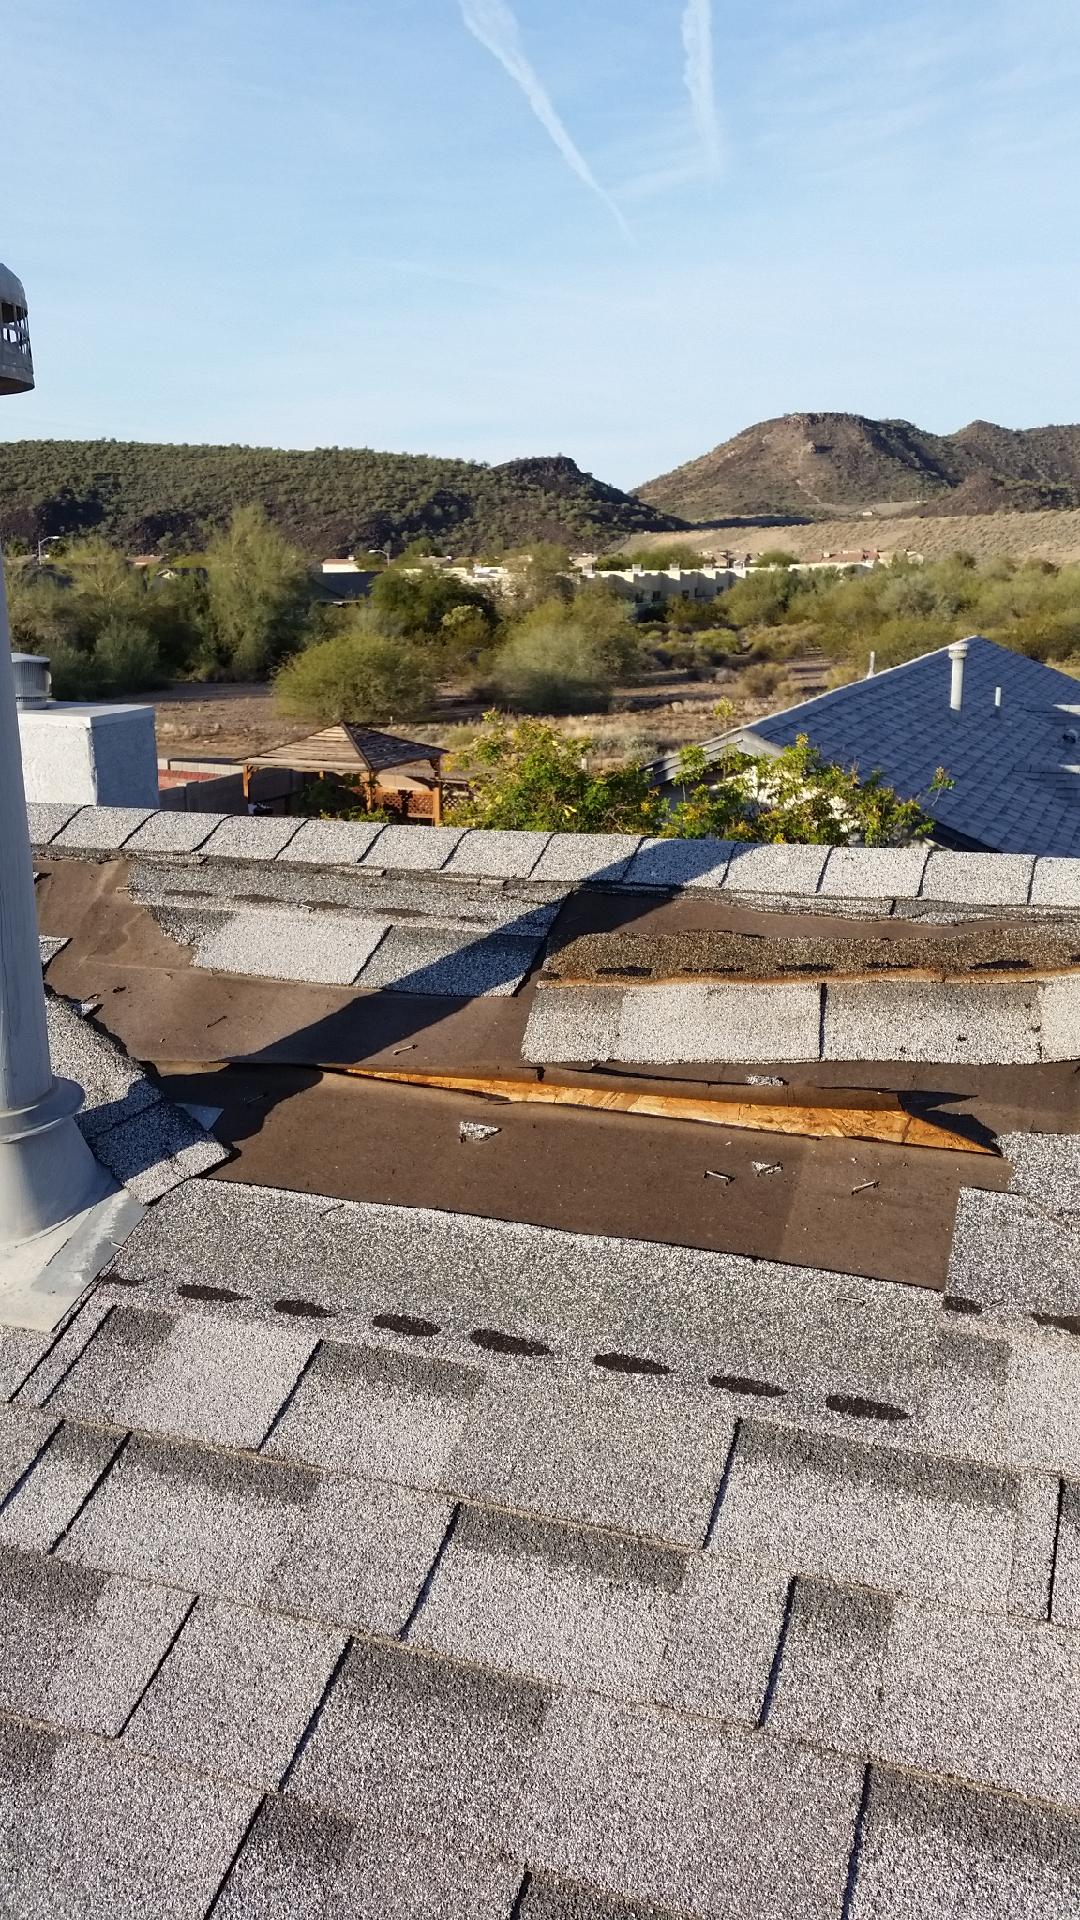 Showing another roof in need of repair.